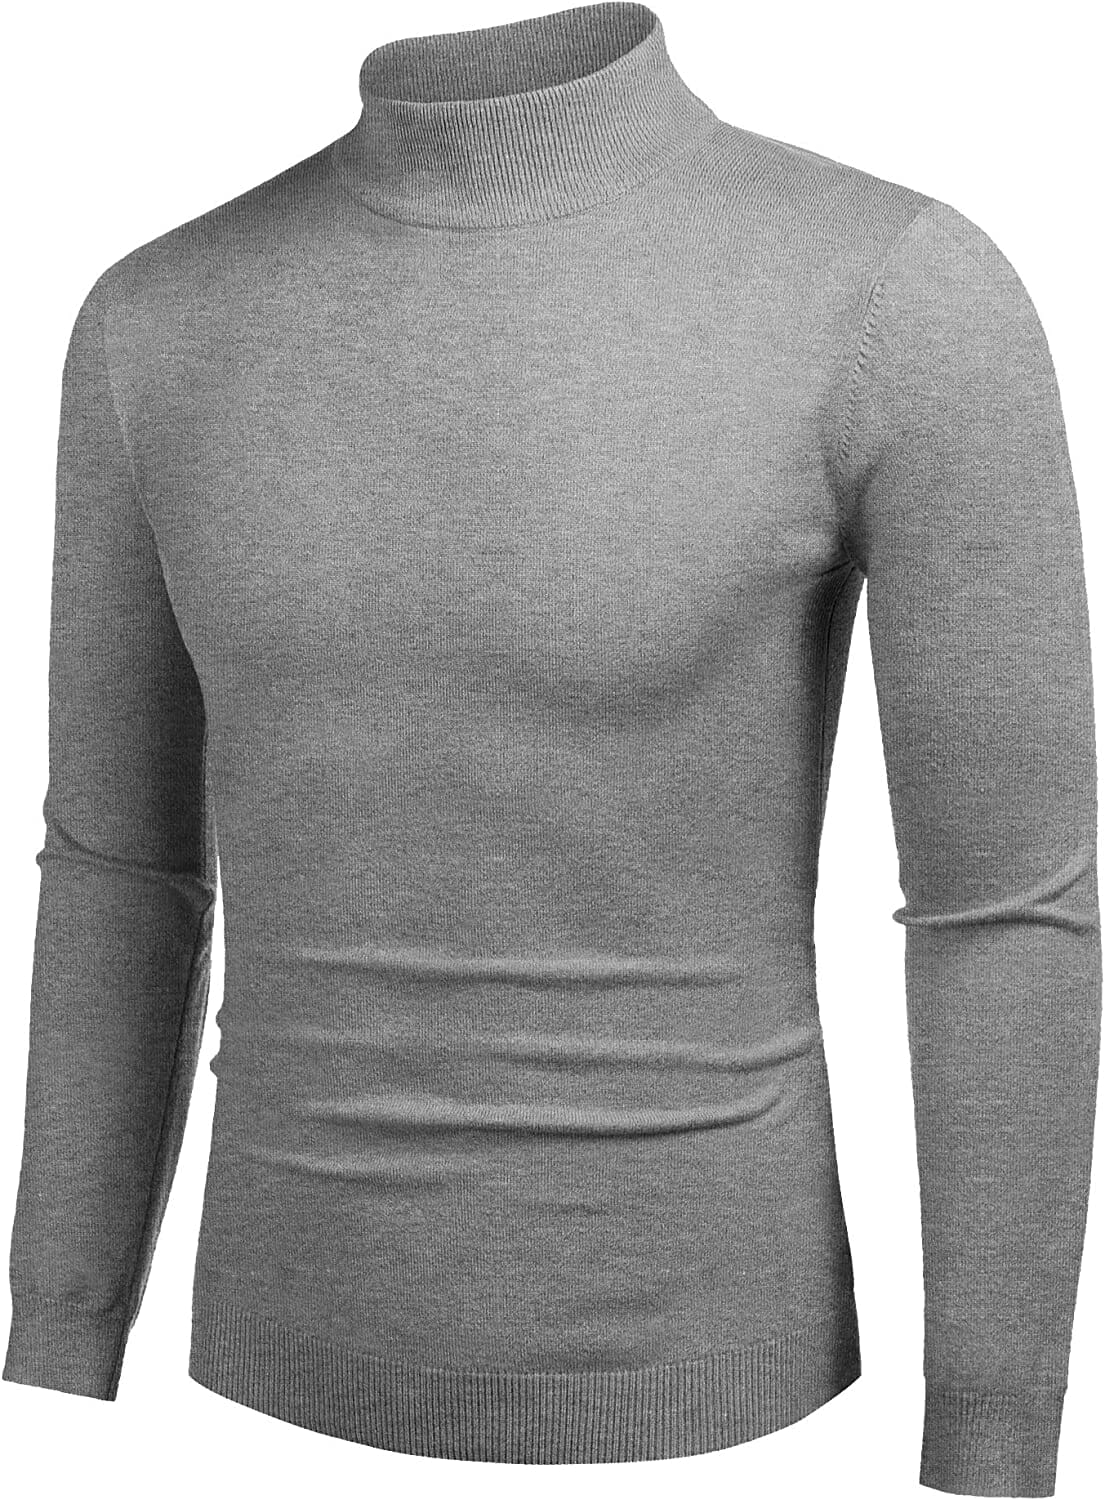 Turtleneck Pullover Basic Knitted Thermal Sweaters (US Only) Sweaters COOFANDY Store Grey S 